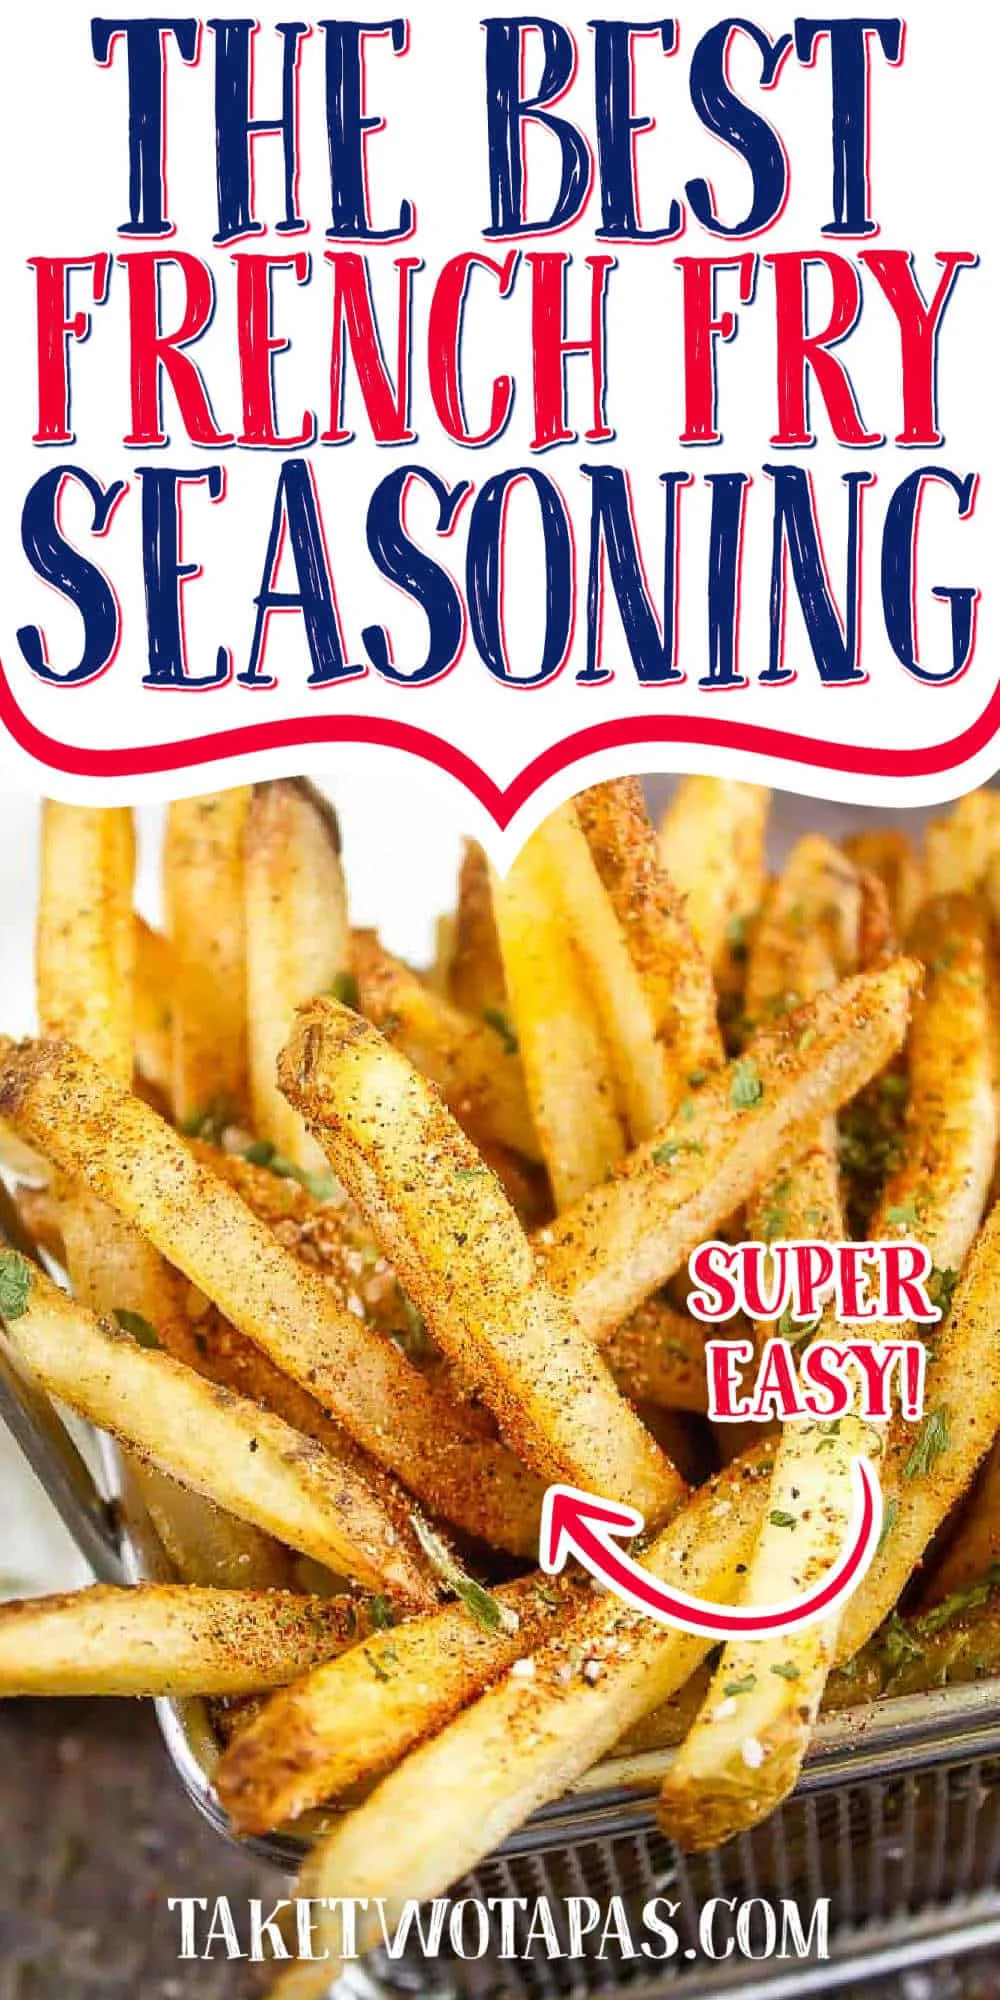 Pinterest image of fry seasoning on french fries with text "amazing fry seasoning - the best!"